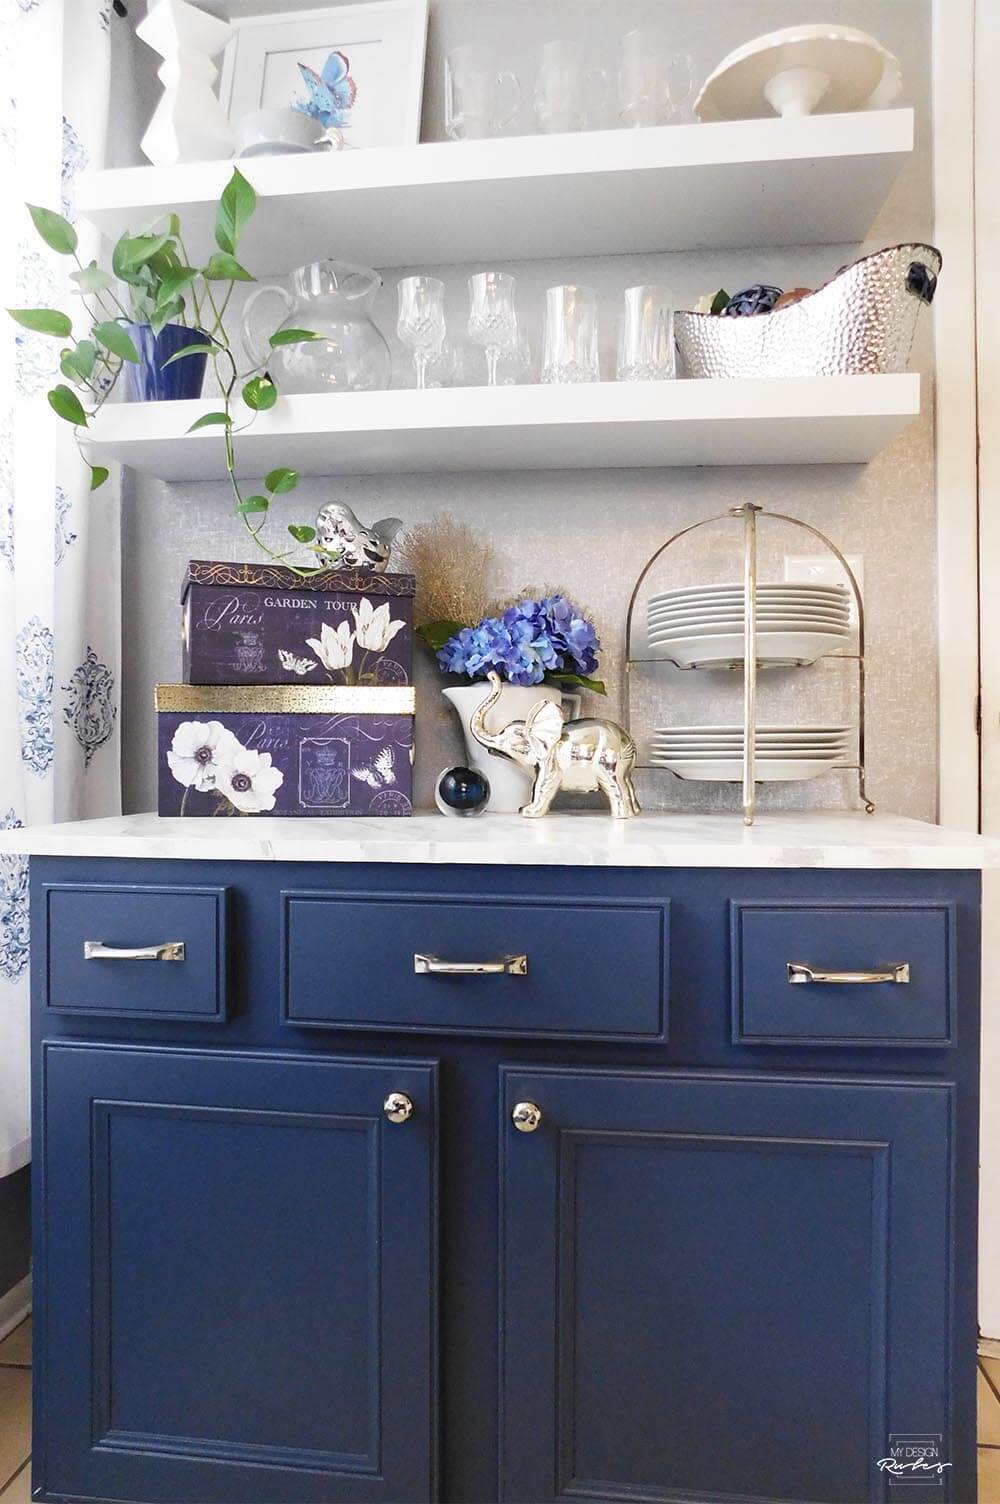 Blue Painted kitchen cabinets using Sherwin Williams Indigo Batik. An easy DIY upgrade to an online garage sale find. Use it as a test before you paint your whole kitchen. #offerup #beforeandafter #paintedfurniture #color #furniture